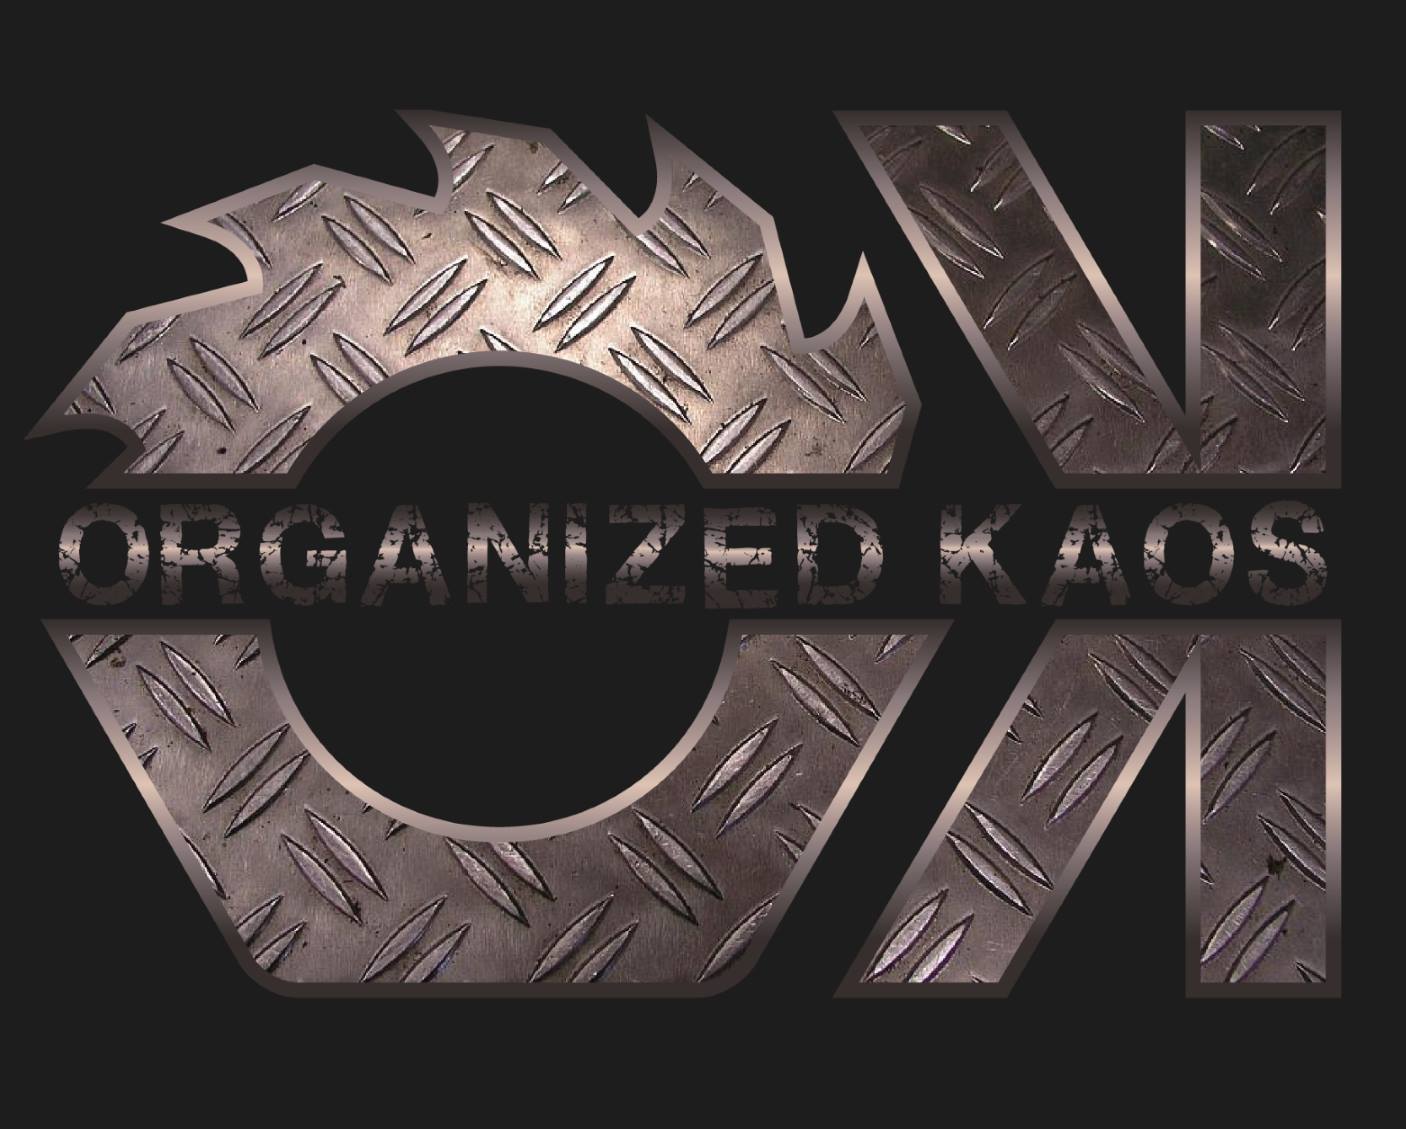 Guest Missions Speaker: Organized Kaos